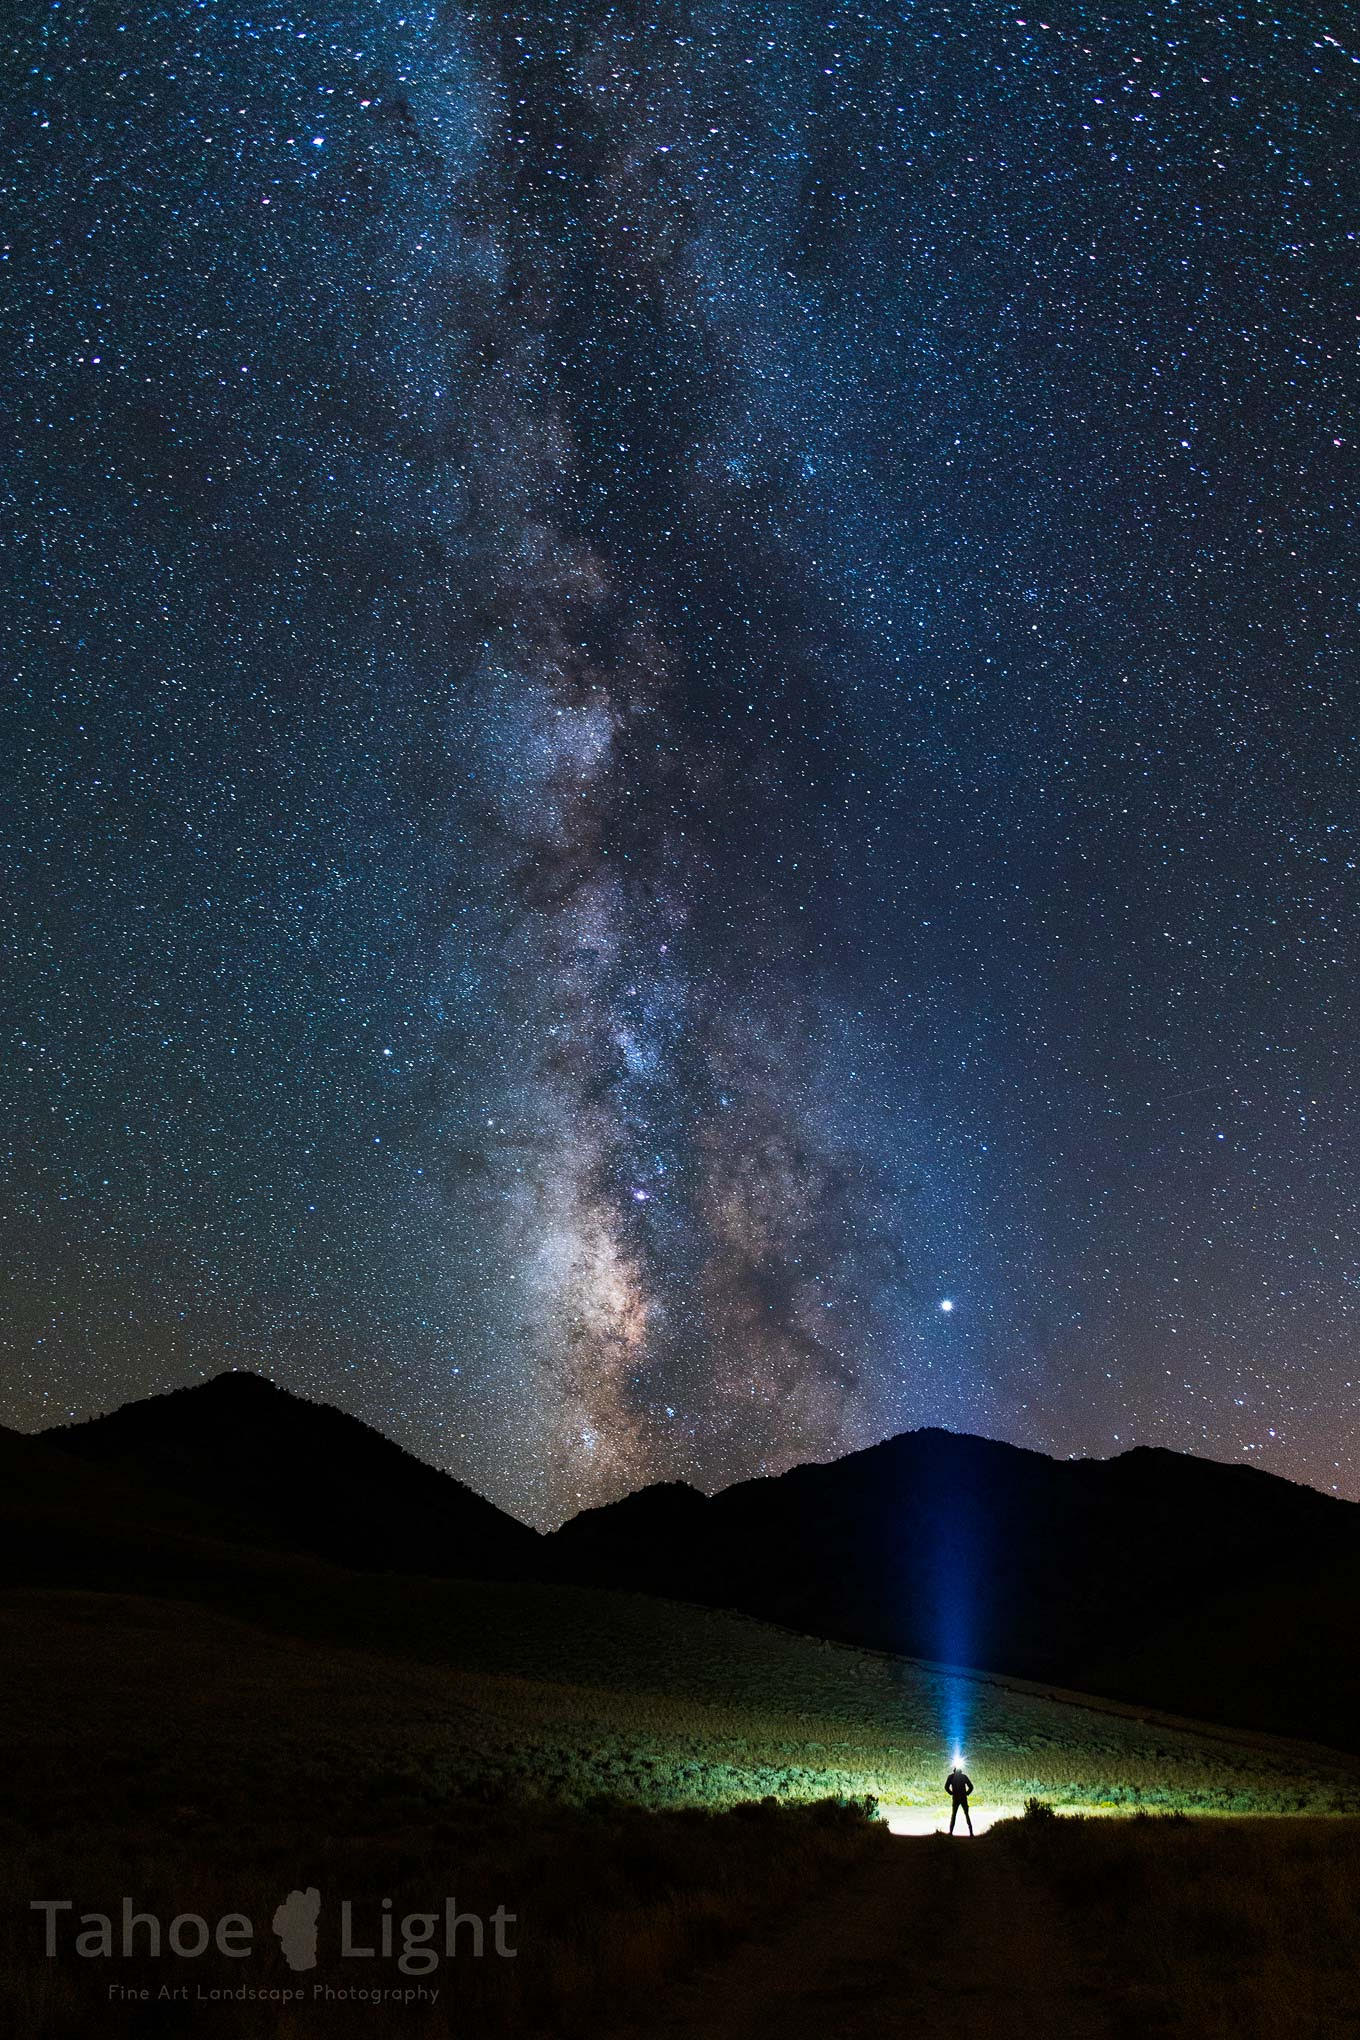 The Milky Way stretches across the night sky with a person with a bright headlamp standing with hands on hips in front of mountain.   